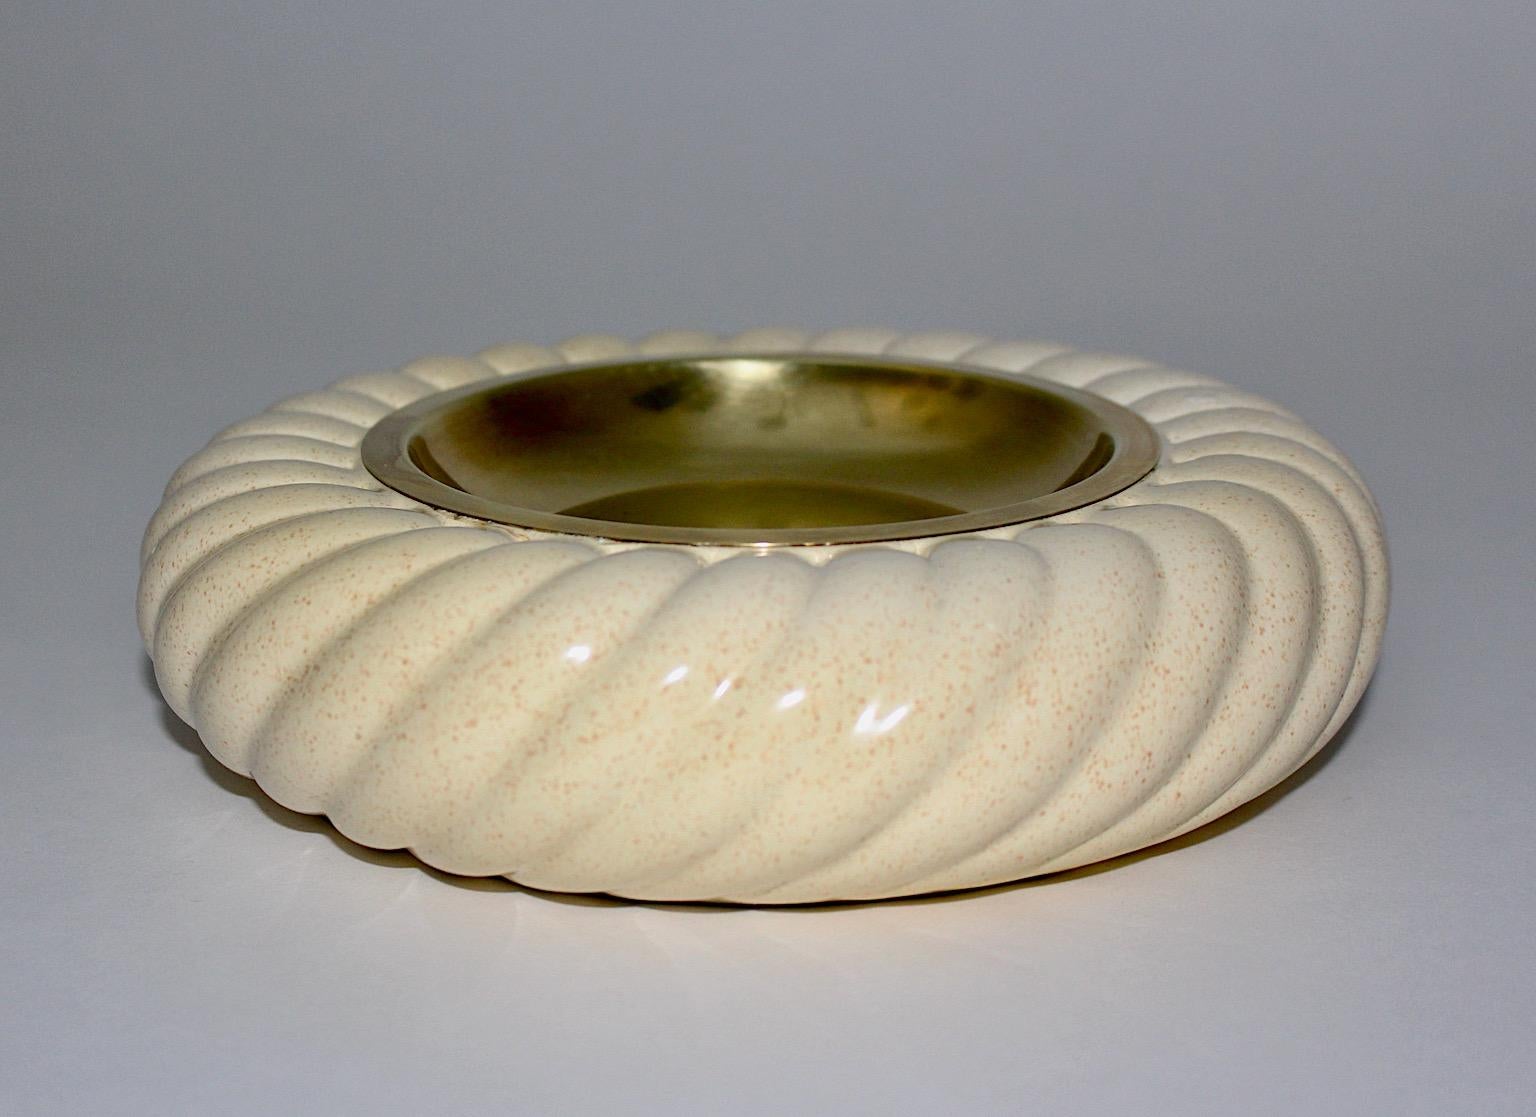 Hollywood Regency Style vintage bowl or catchall from ceramic and brass by Tommaso Barbi, Italy, 1970s.
A sophisticated Italian bowl or catchall worked out from white twisted ceramic with brass center by Tommaso Barbi for Ceramichi for Tommaso